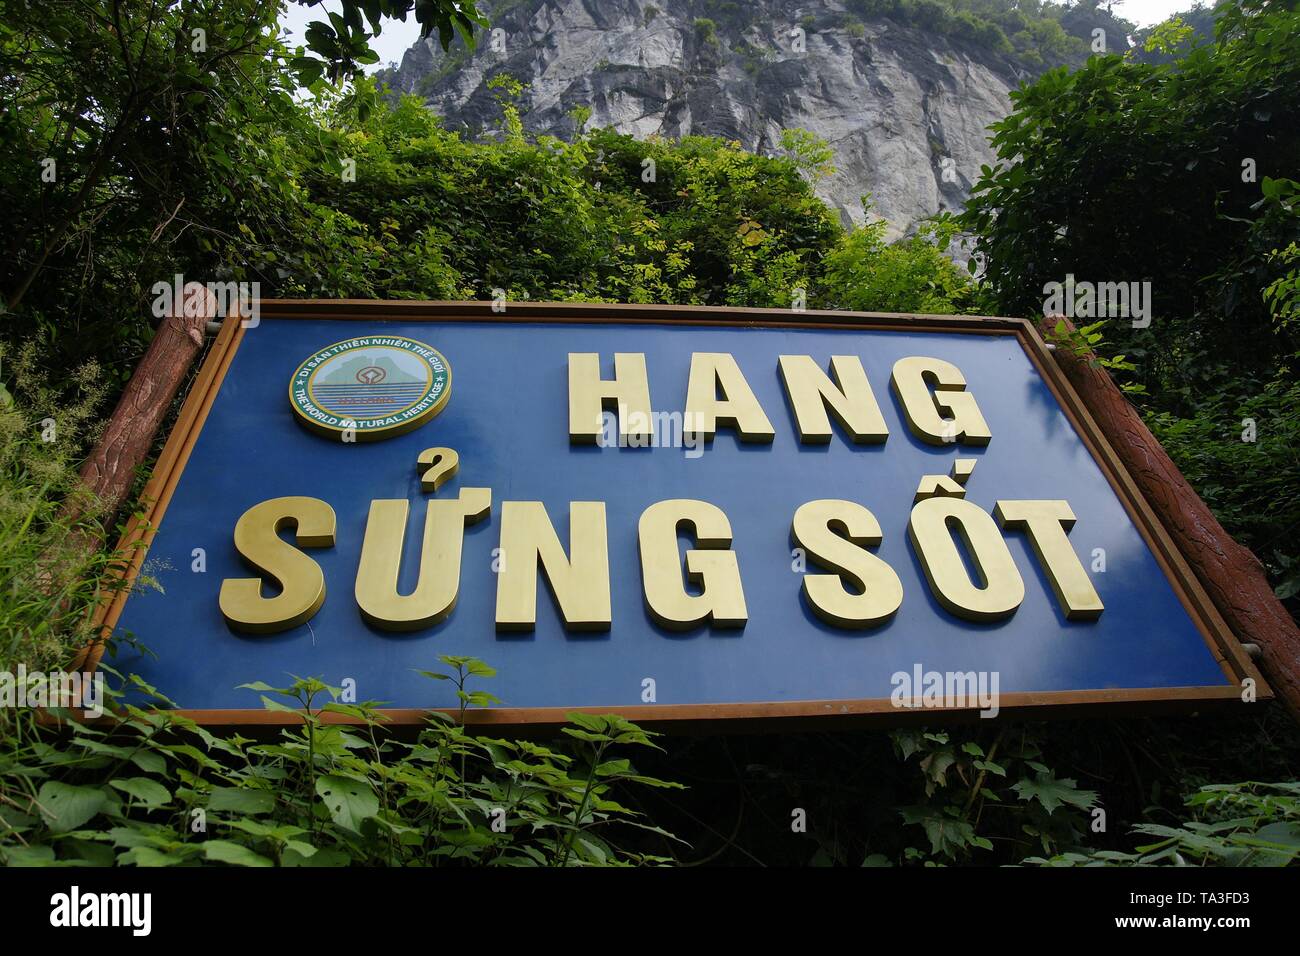 Hang sung sot, vietnam - October 31, 2011: As part of the visit to Halong Bay, tours include a visit to this huge caves of Hang Sung Sot Cave. In the  Stock Photo